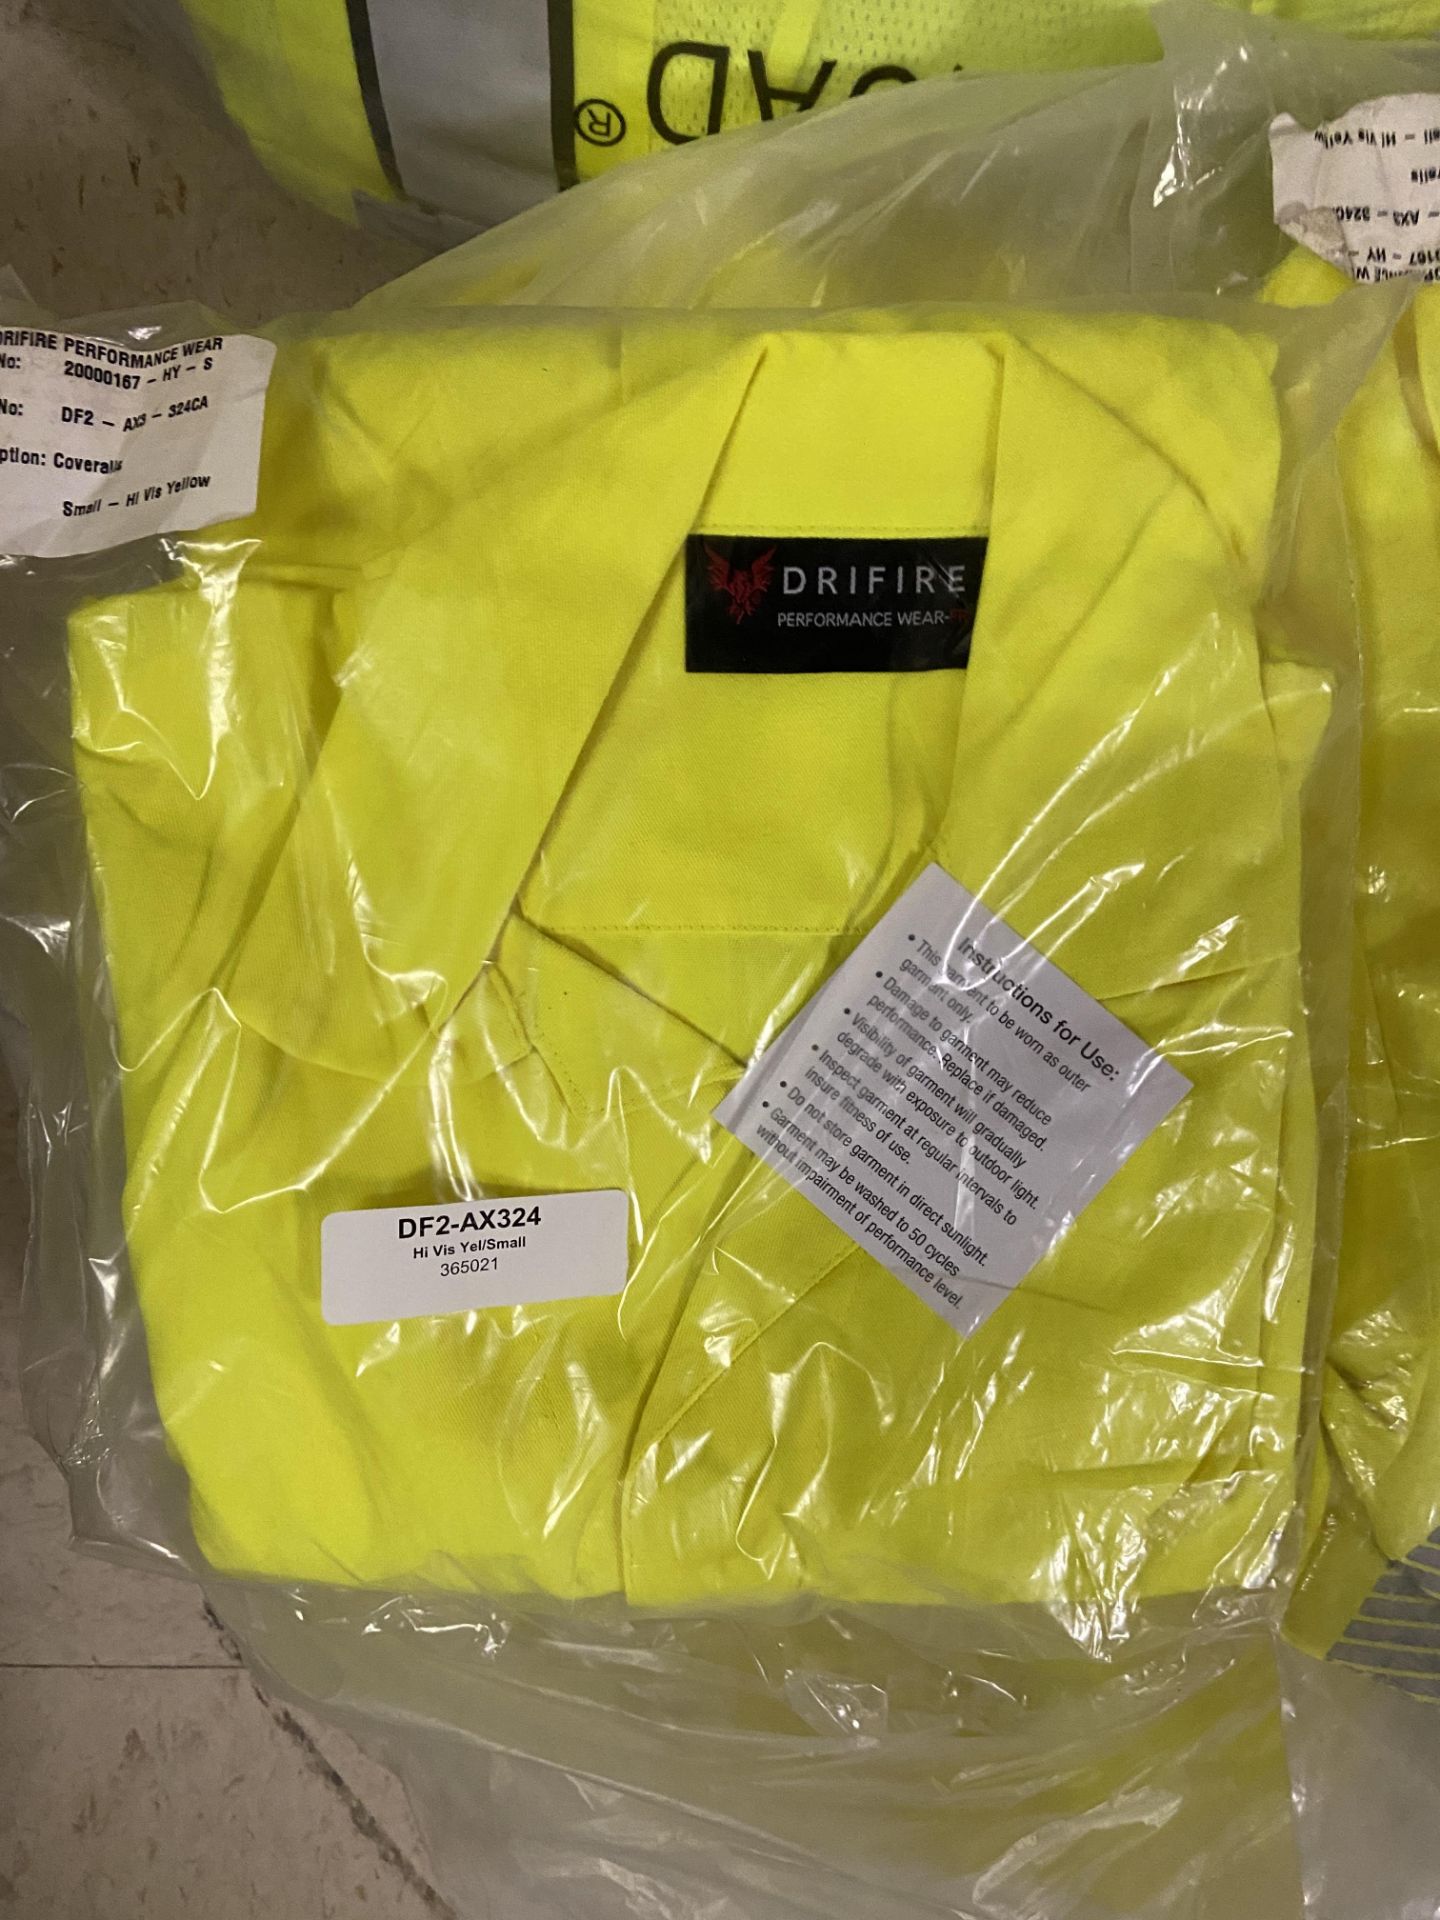 Blauer Bright Yellow Neon Safety Vests (Approx 50+), DriFire Neon Yellow Shirts (Approx 25) Utility - Image 6 of 6